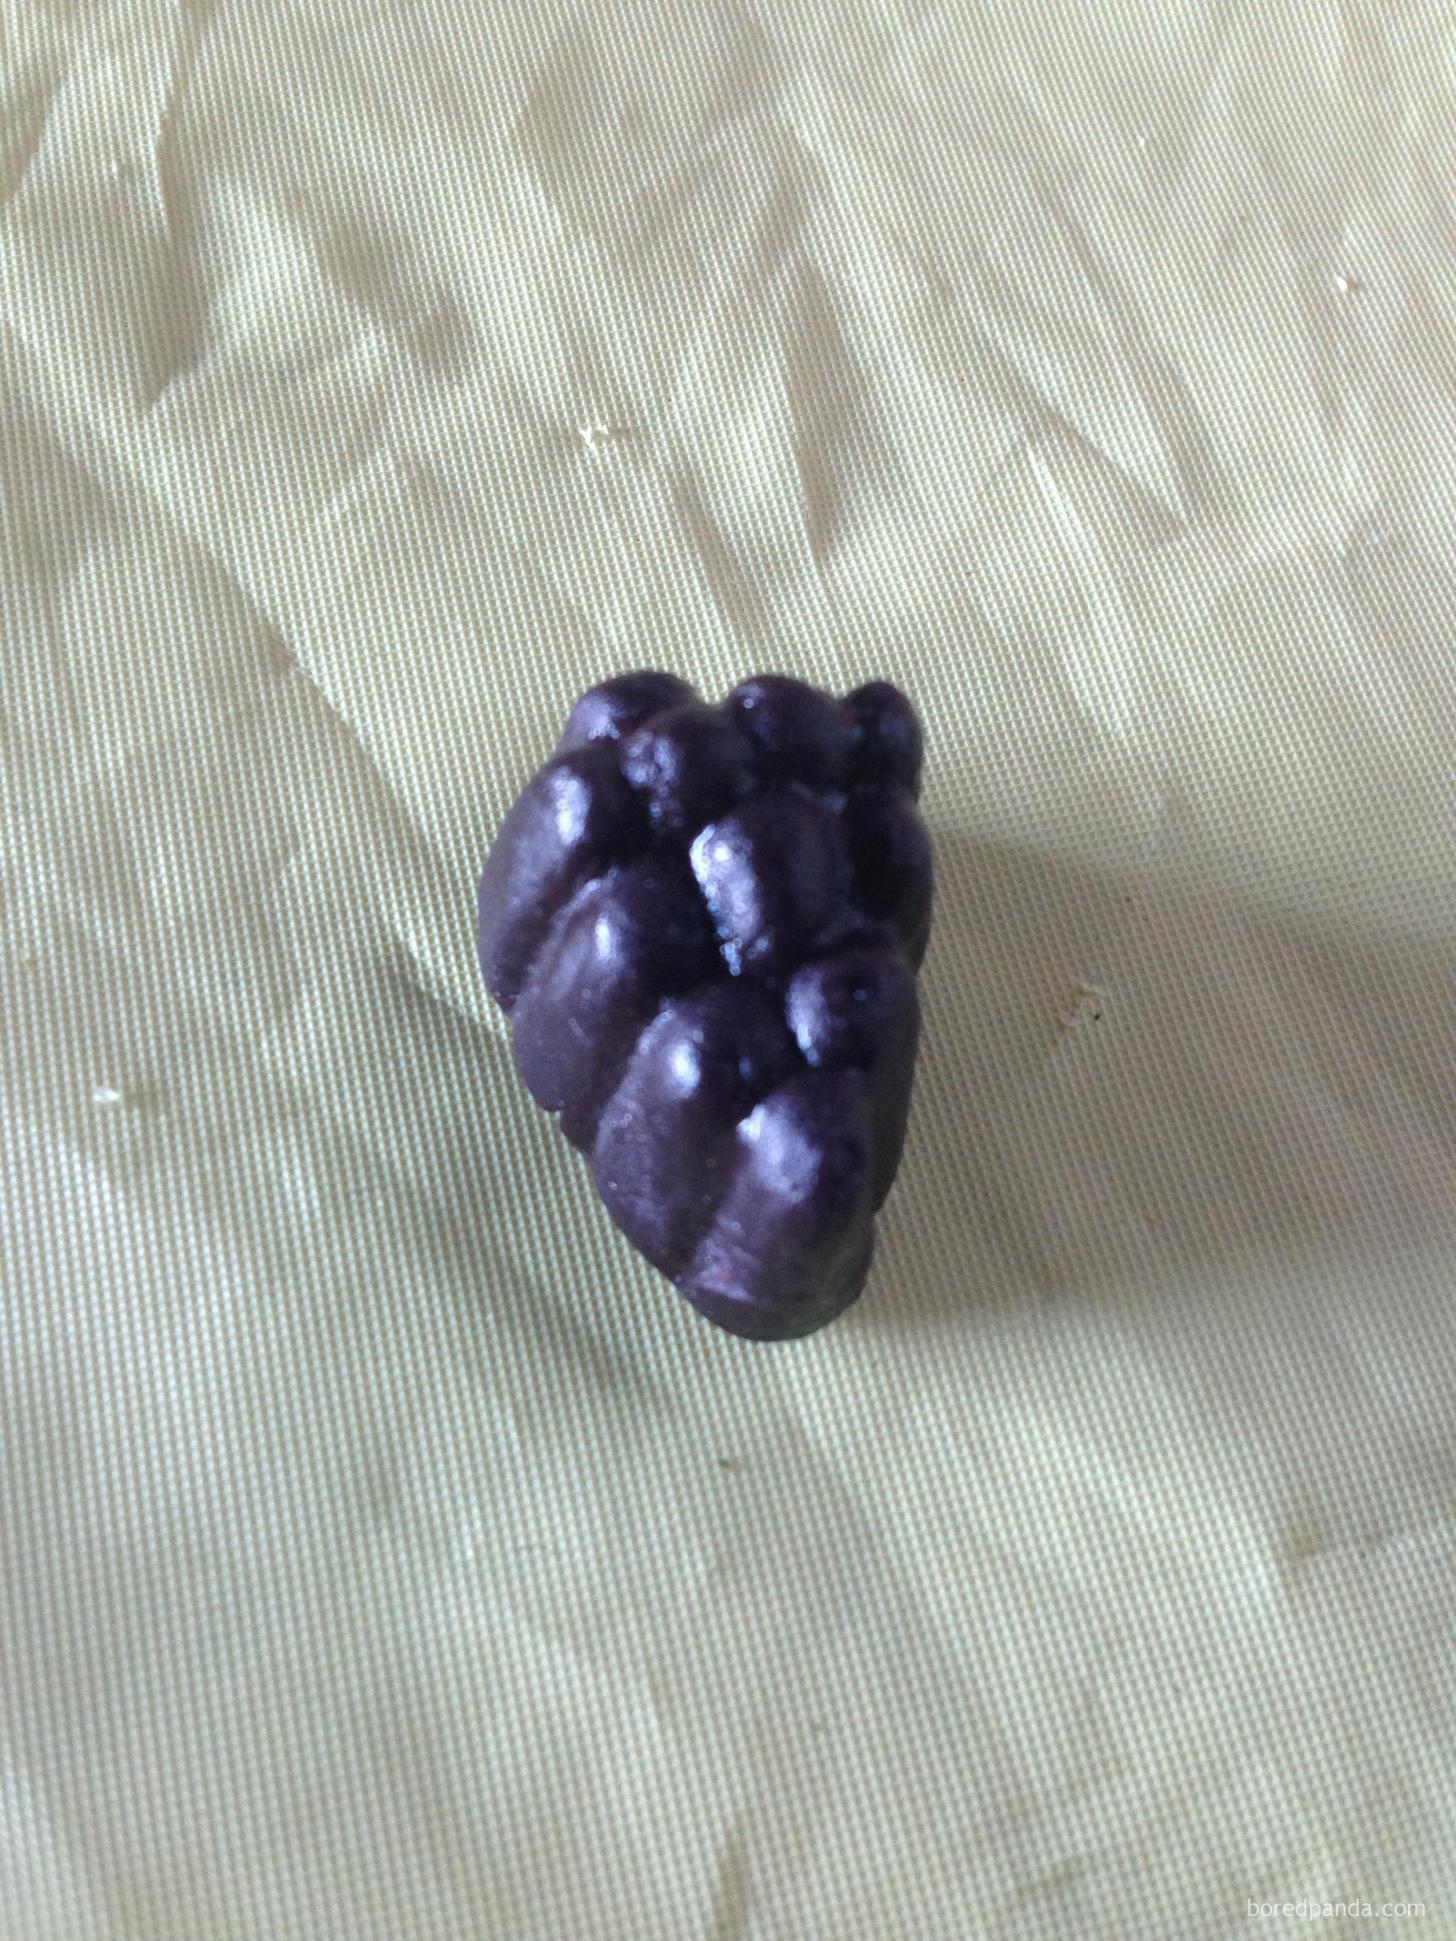 This Purple, Grape Shaped Little F*cker Is Black Licorice Flavored